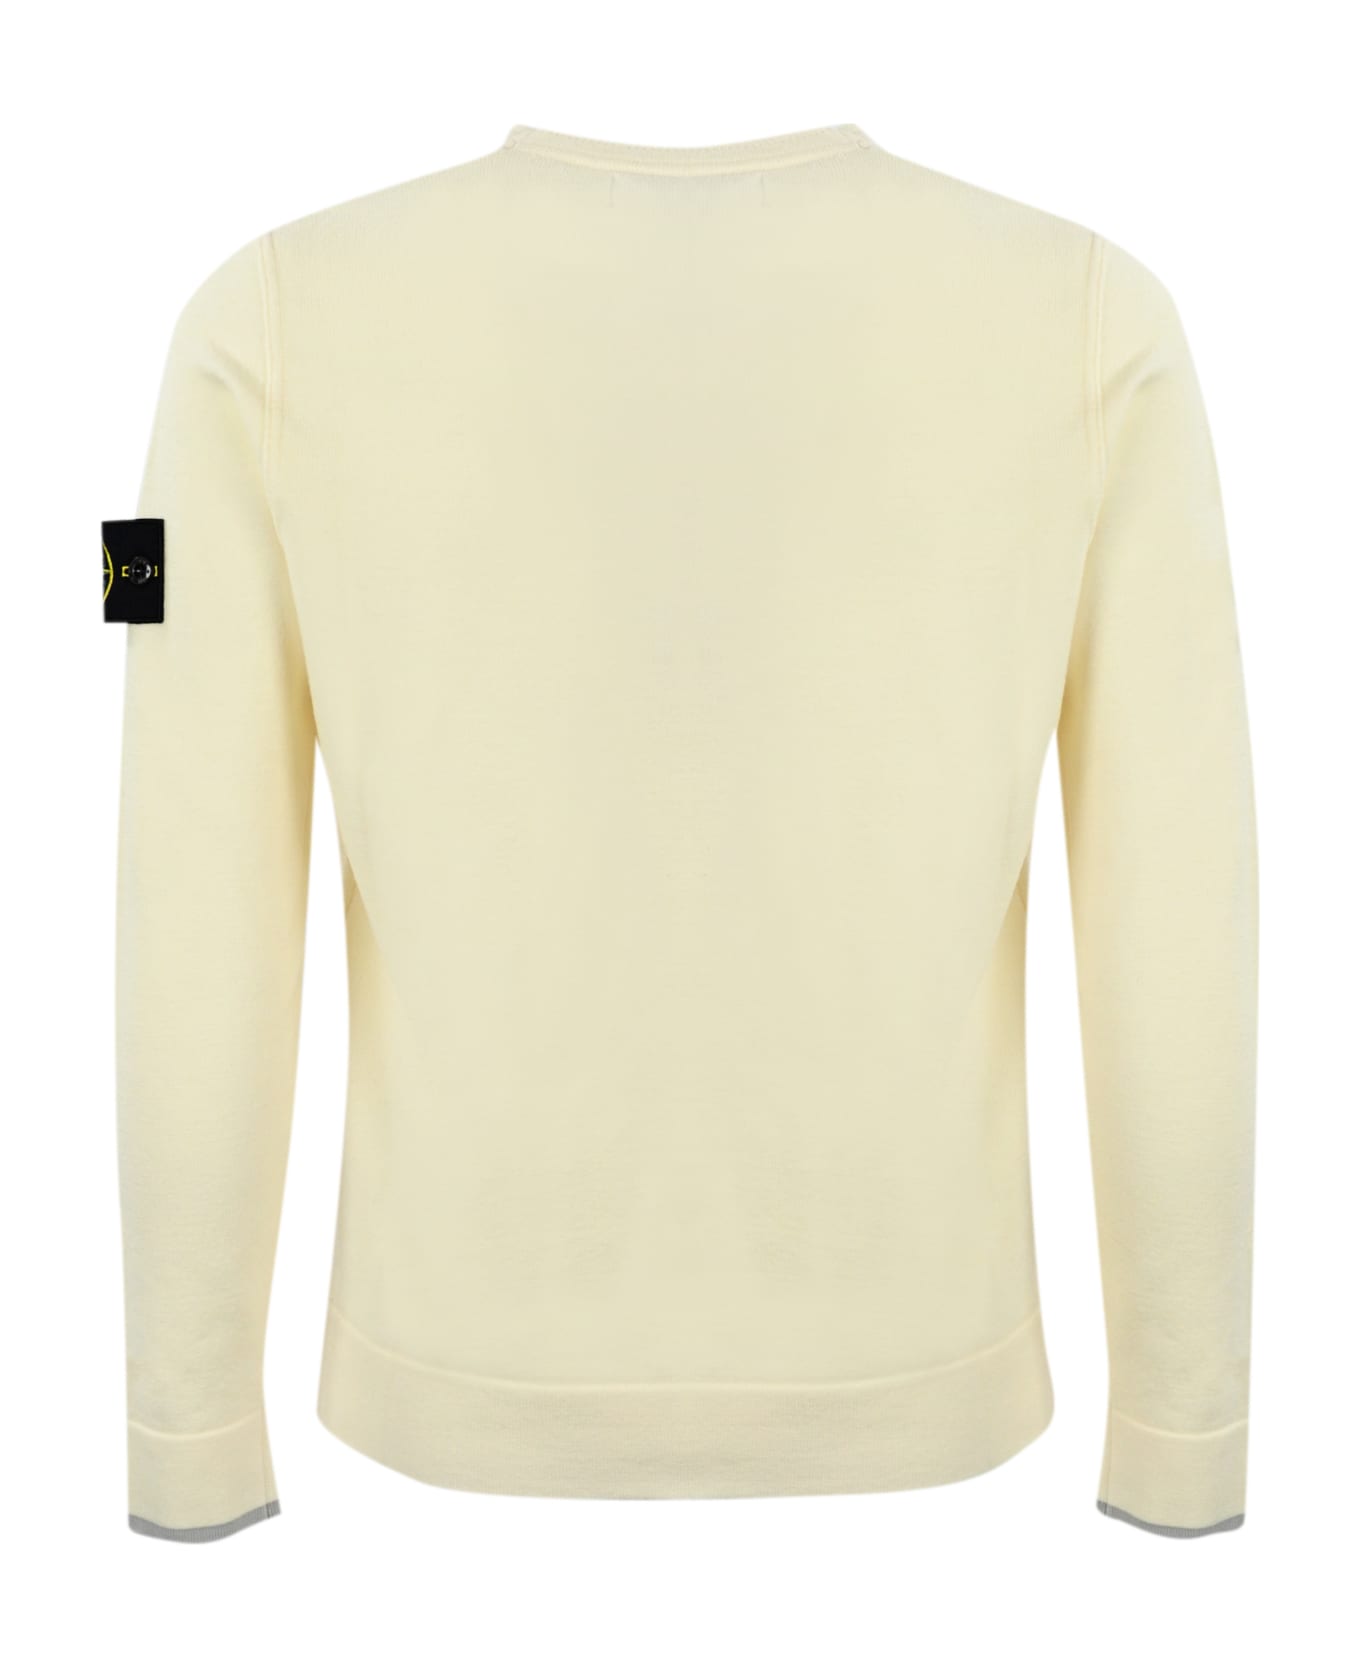 Stone Island Crewneck Sweater With Logo Patch In Wool Blend - White フリース